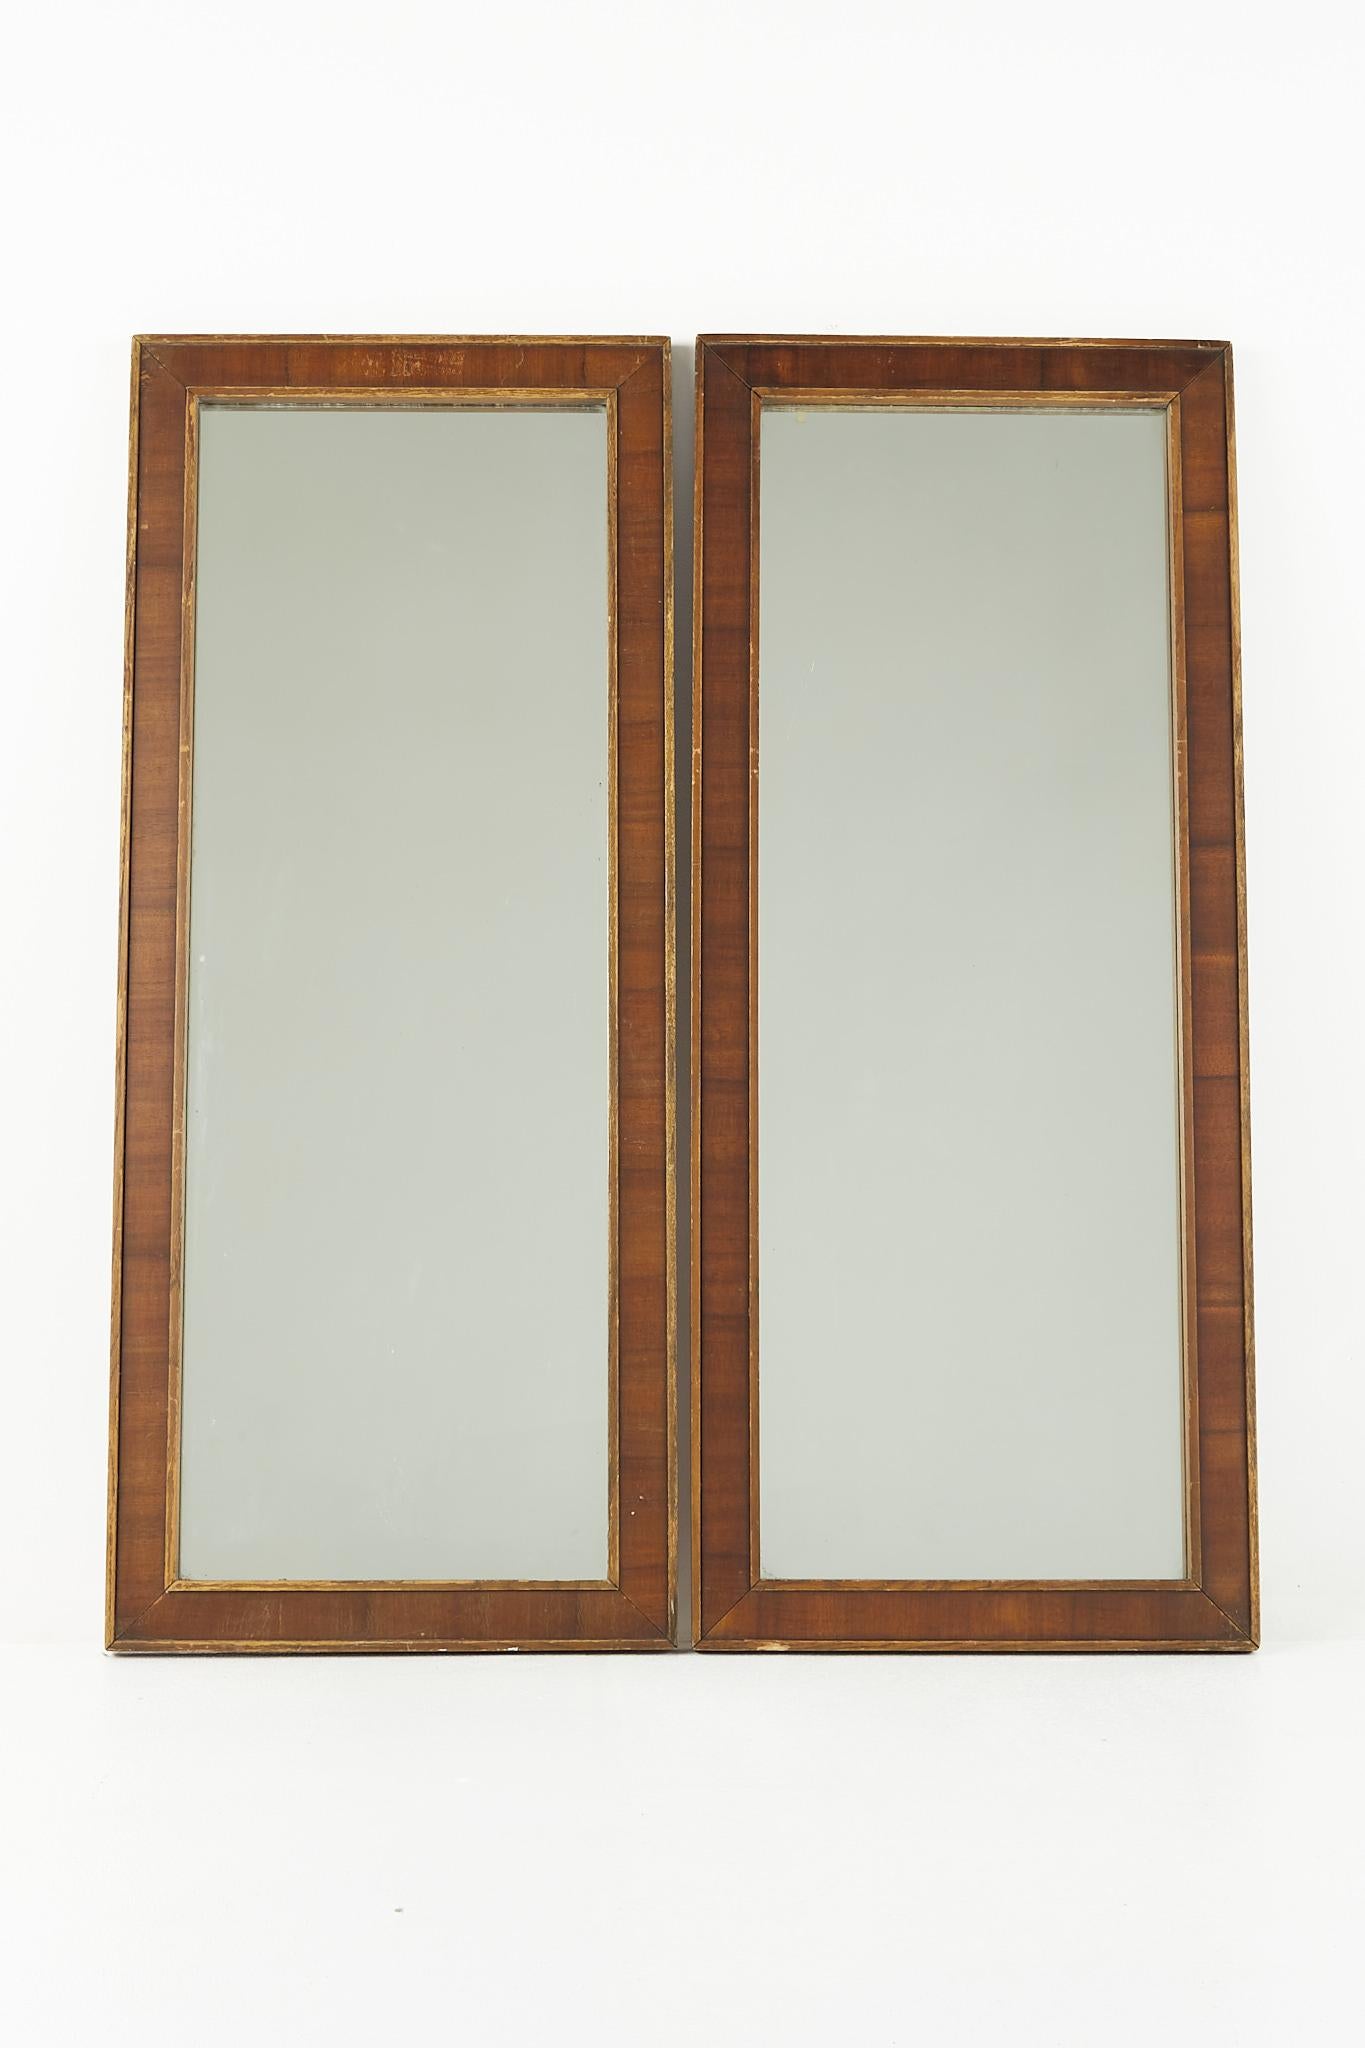 United Brutalist mid century walnut mirrors - pair

Each of these mirrors measure: 20.25 wide x 1.25 deep x 48.5 inches high

All pieces of furniture can be had in what we call restored vintage condition. That means the piece is restored upon